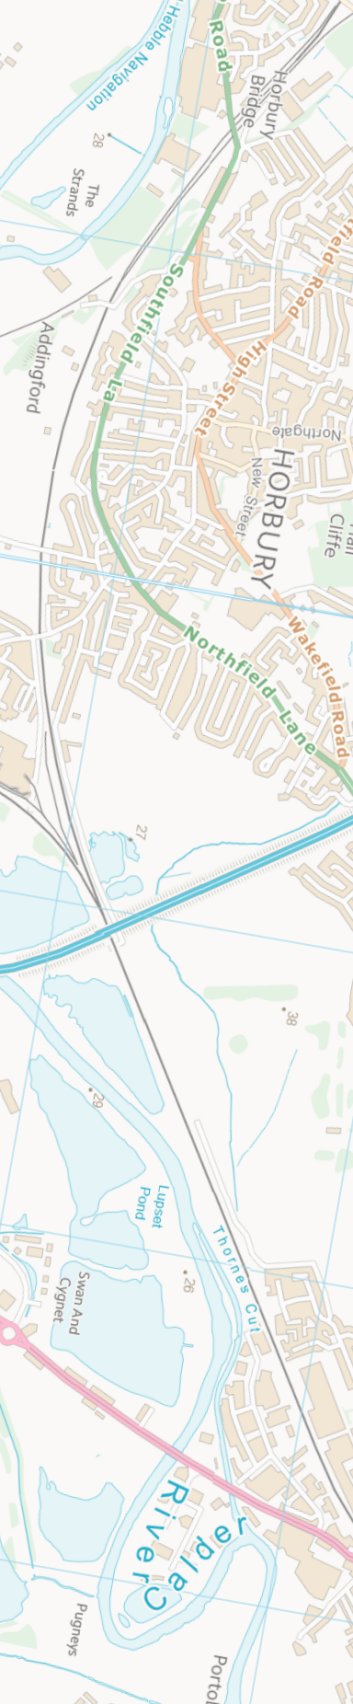 Section from Ordnance Survey OpenSource mapping 2013 showing L&YR railway line at Horbury Junction